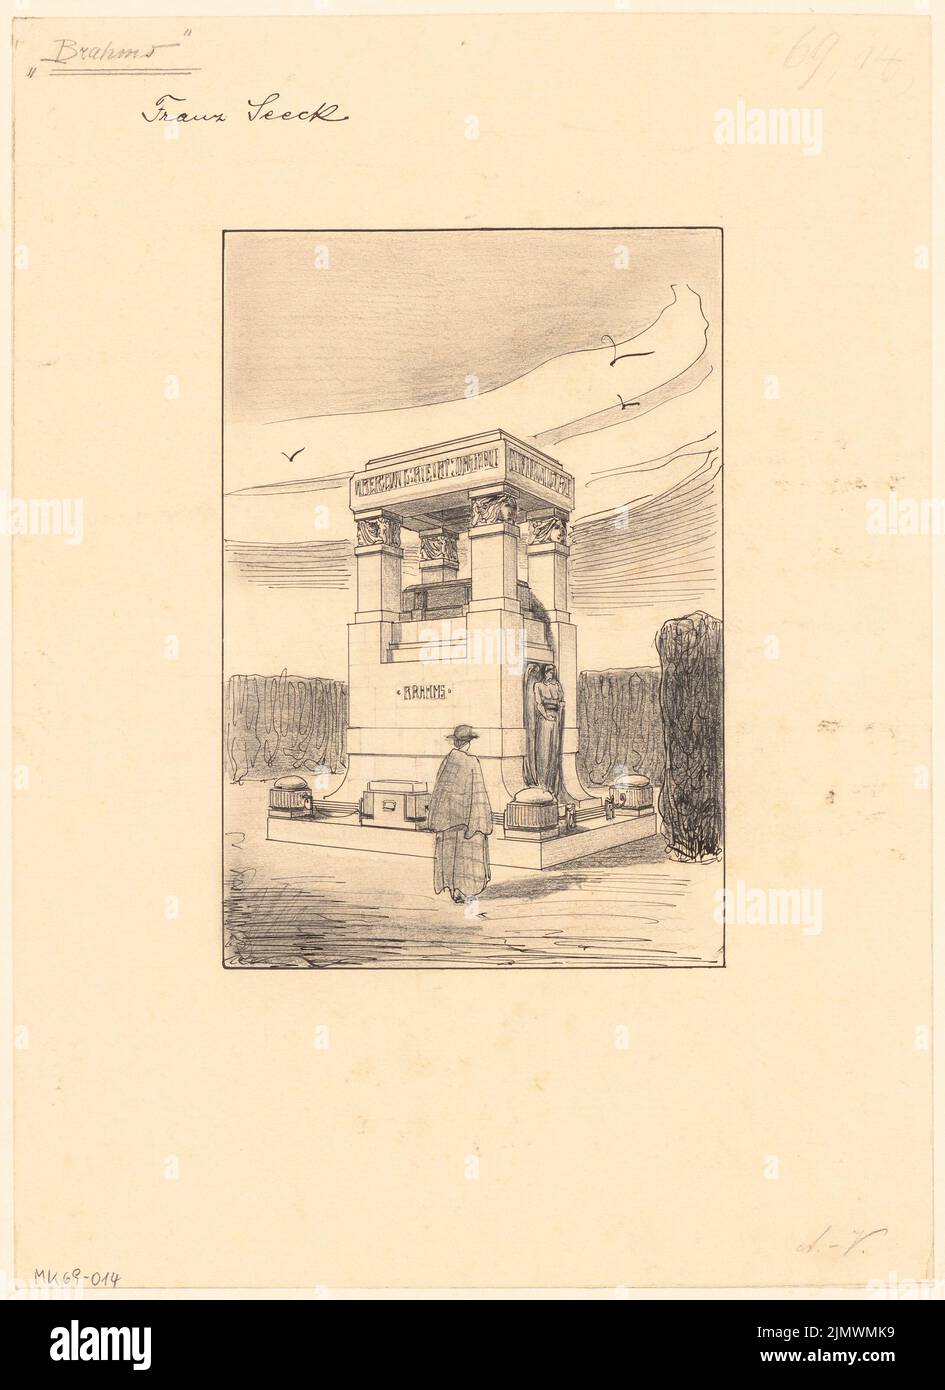 Seeck Franz (1874-1944), grave for an artist. Monthly competition February 1901 (02.1901): floor plan 1:50, torture front view, side view 1:20; 2 scale strips, explanatory text. Tusche watercolor on the box, 45.7 x 33.3 cm (including scan edges) Seeck Franz  (1874-1944): Grab für einen Künstler. Monatskonkurrenz Februar 1901 Stock Photo